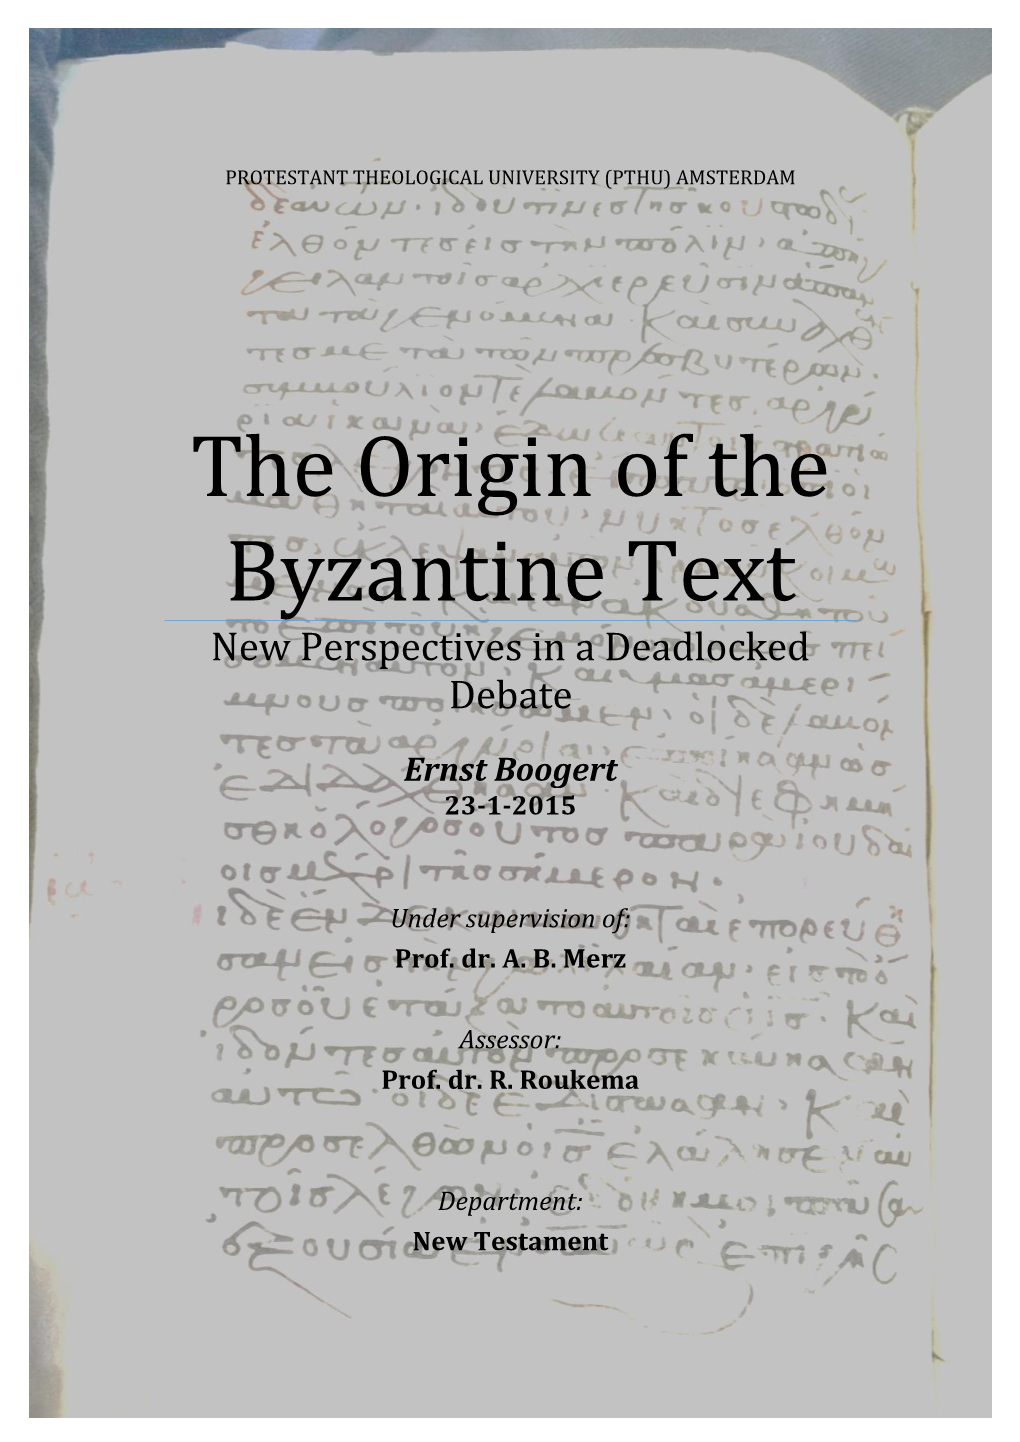 The Origin of the Byzantine Text New Perspectives in a Deadlocked Debate